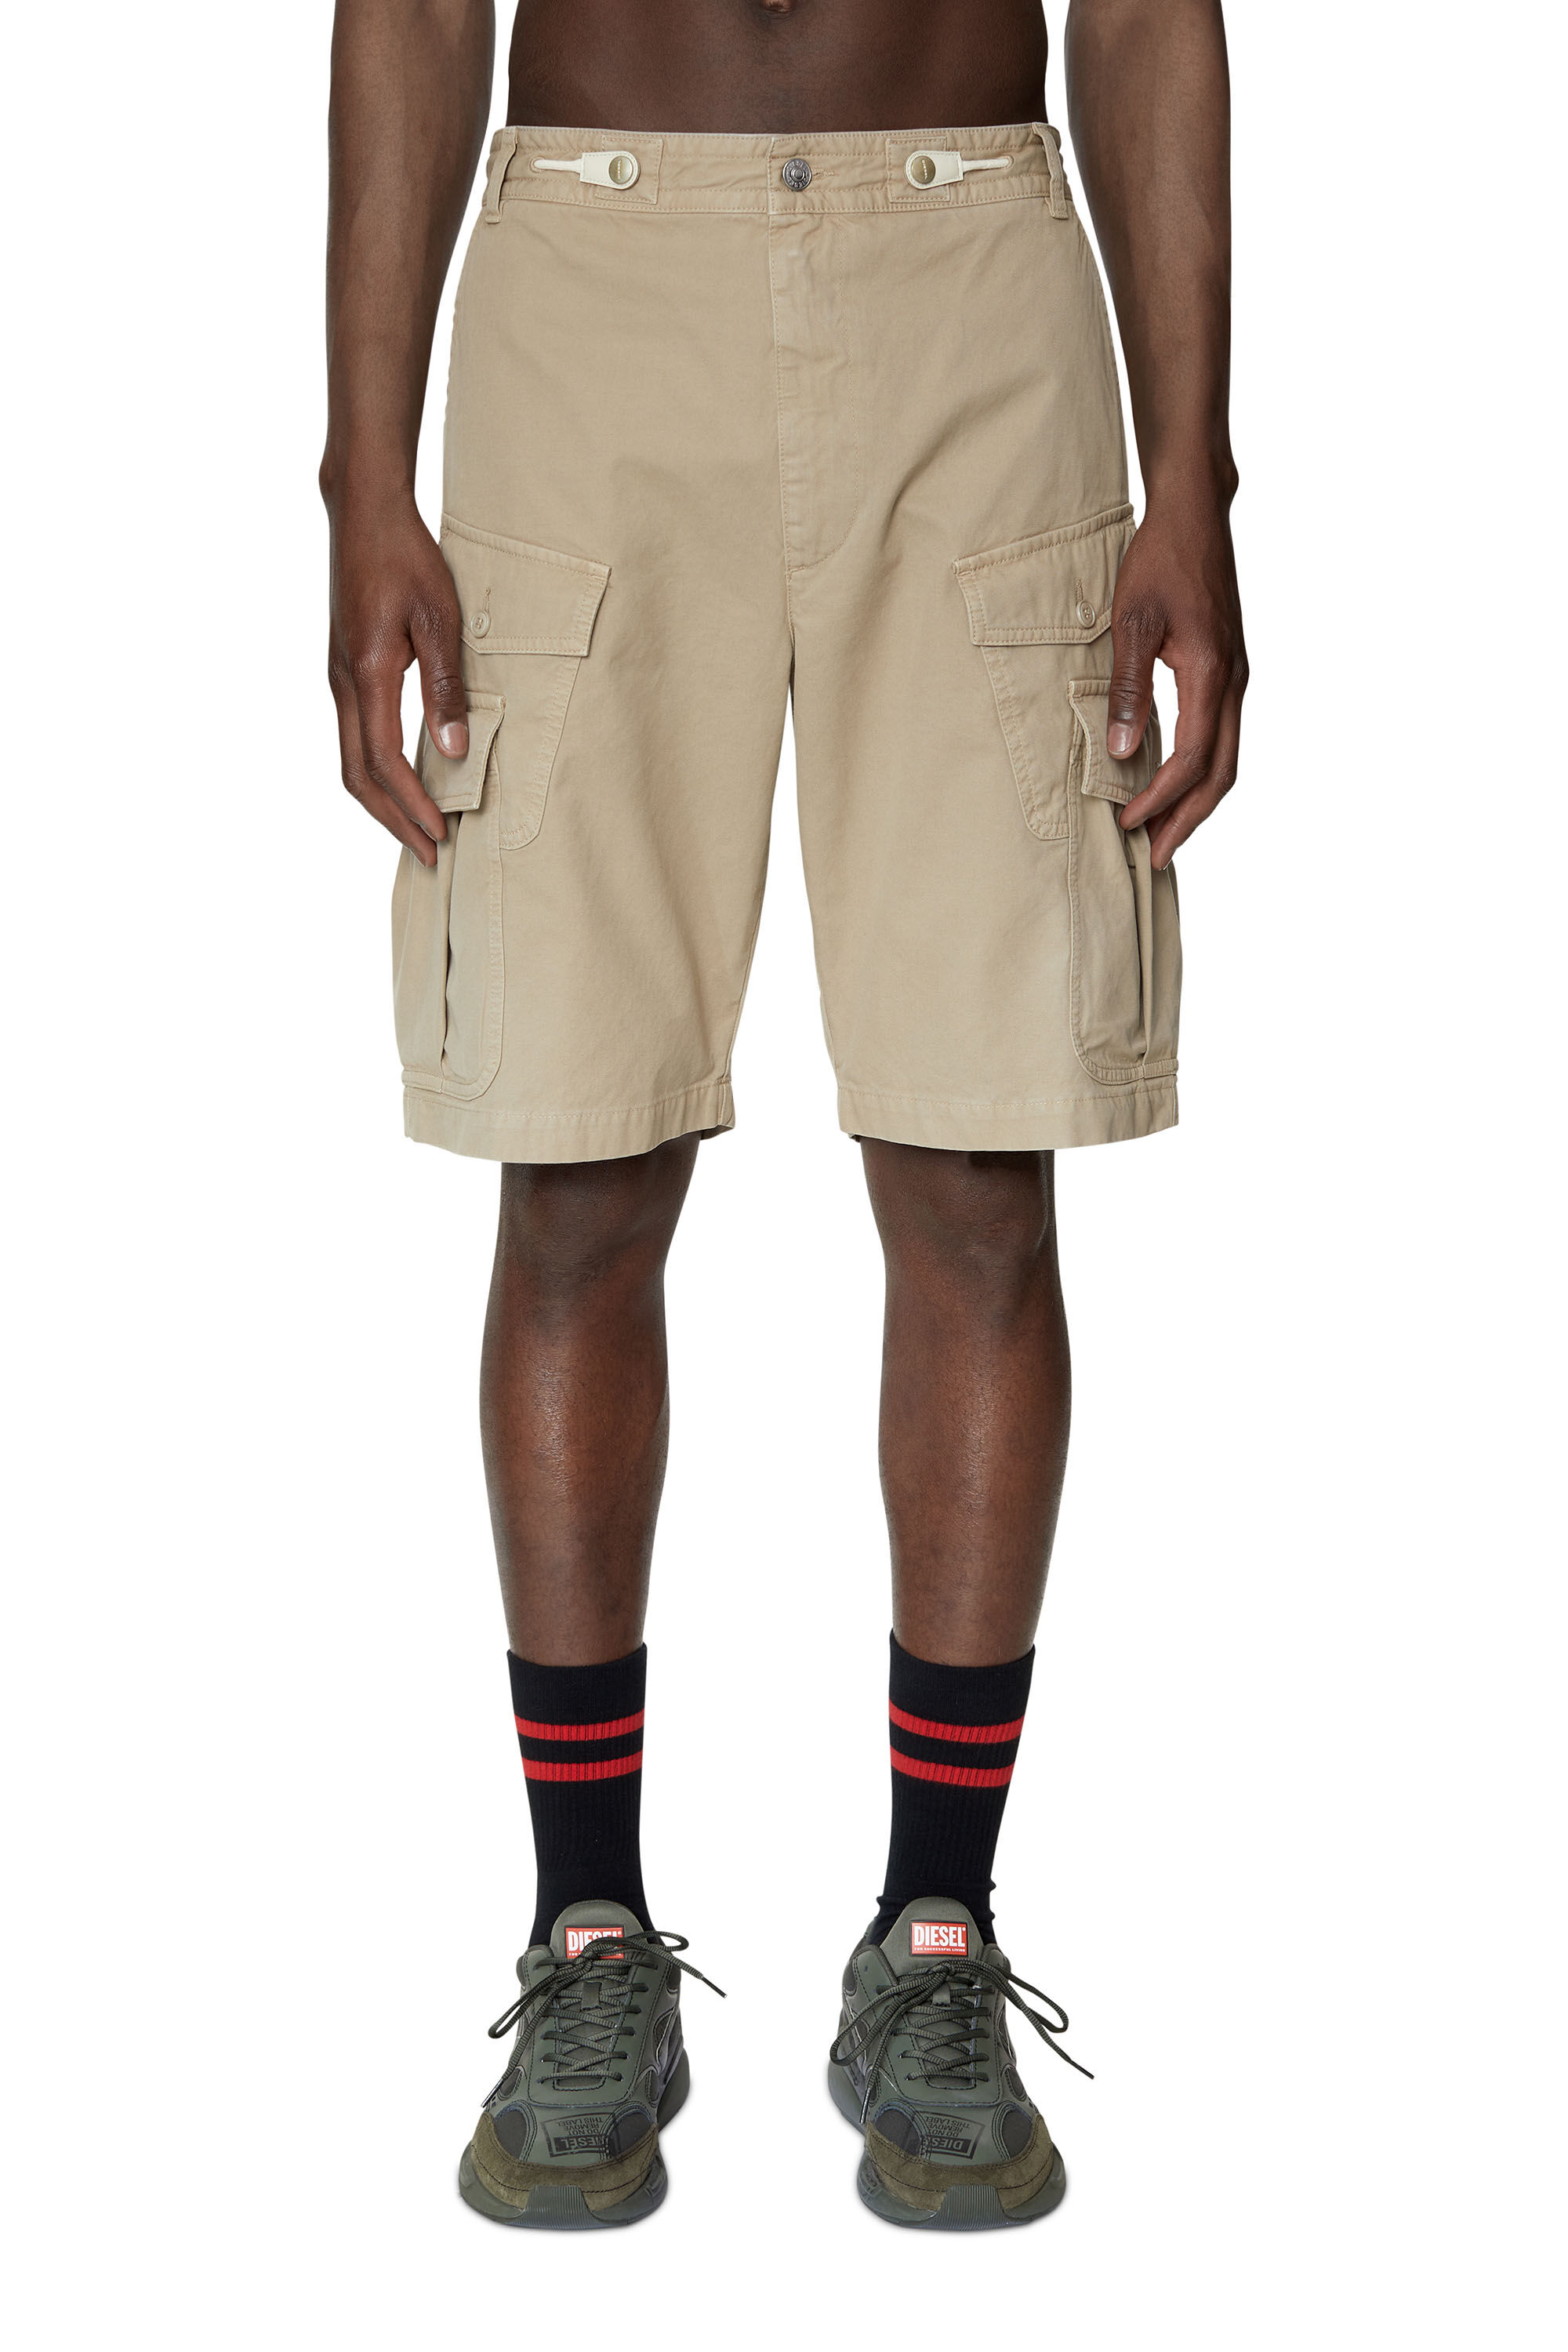 Mens OTB Cargo Shorts Black Twill with Button Flap Pockets and Belt 